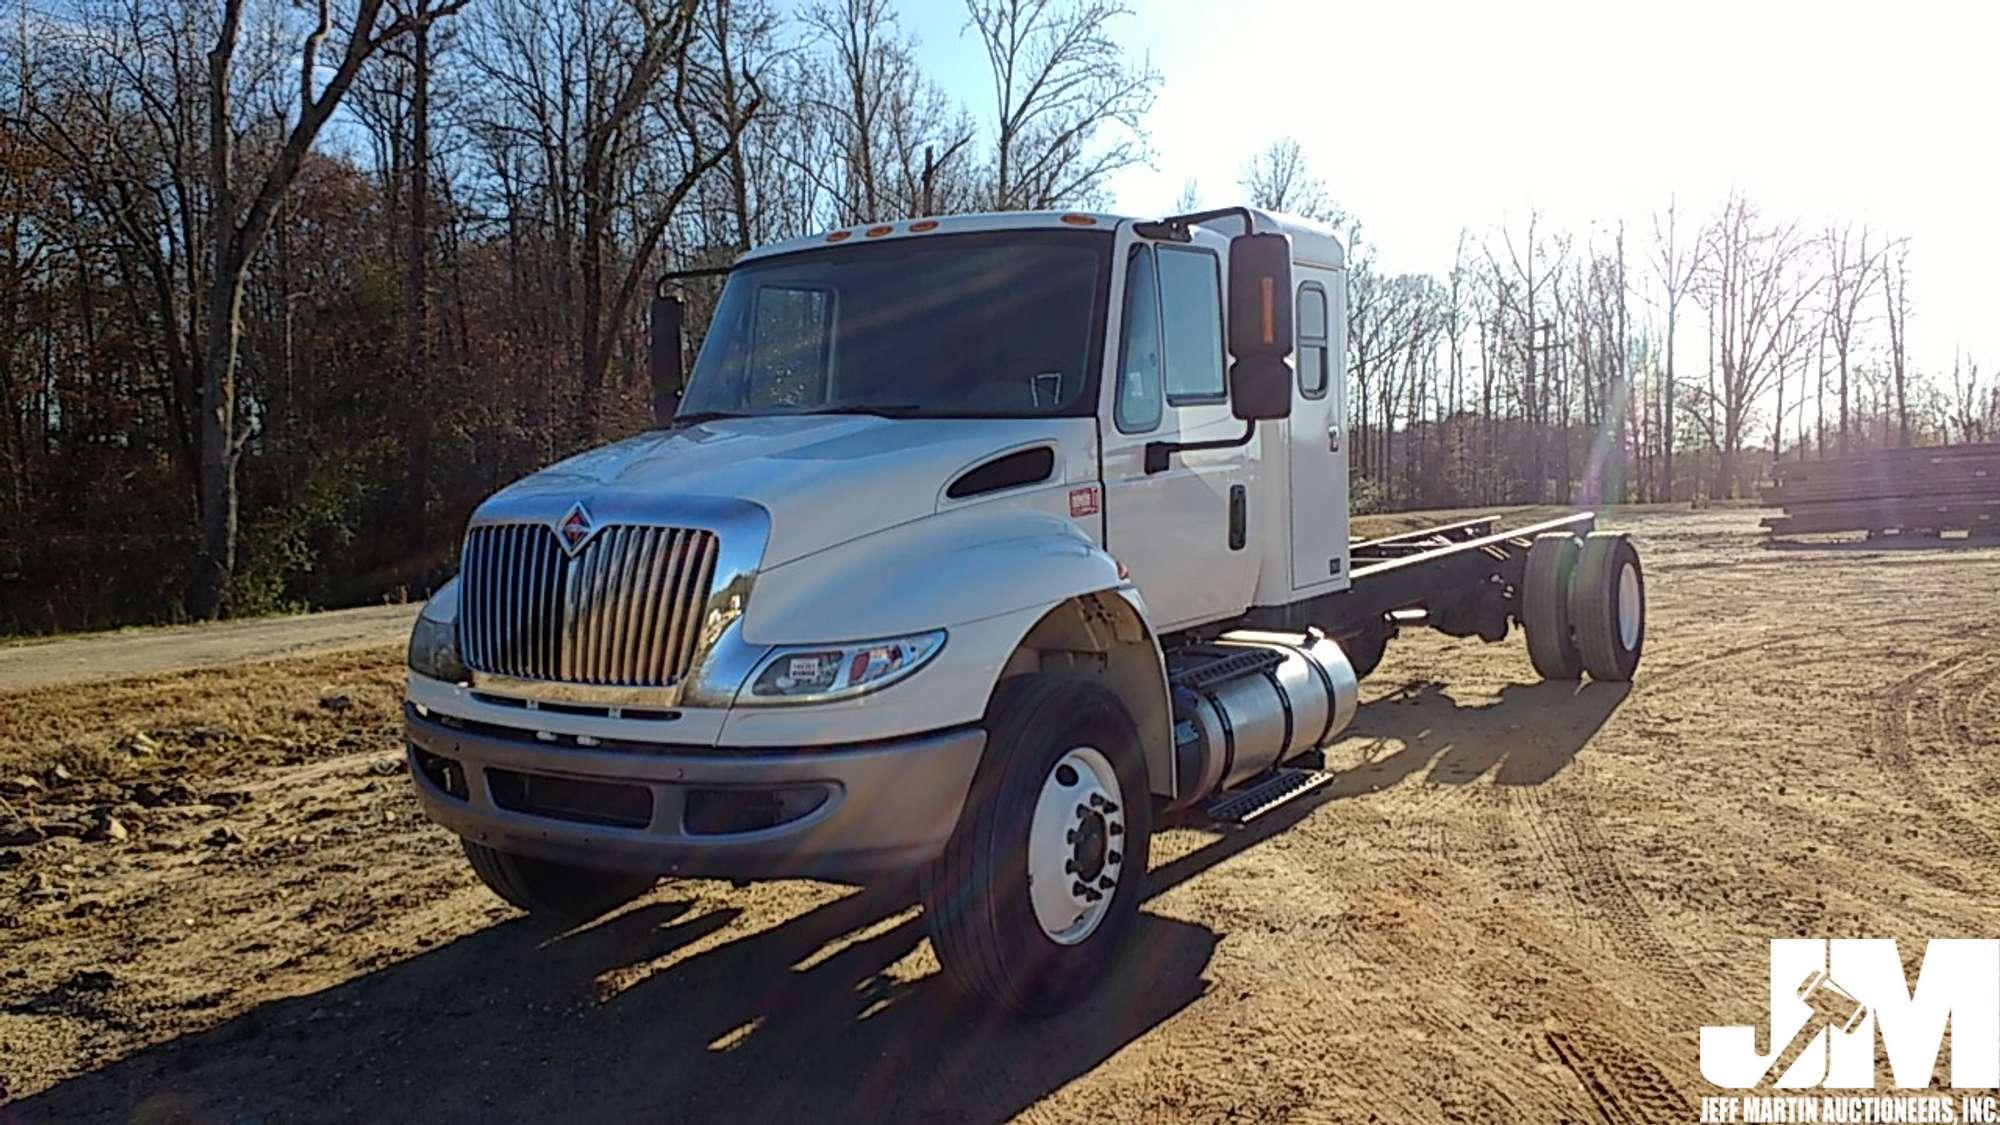 2017 INTERNATIONAL 4400 VIN: 1HTMKSTN3HH476080 S/A CAB & CHASSIS